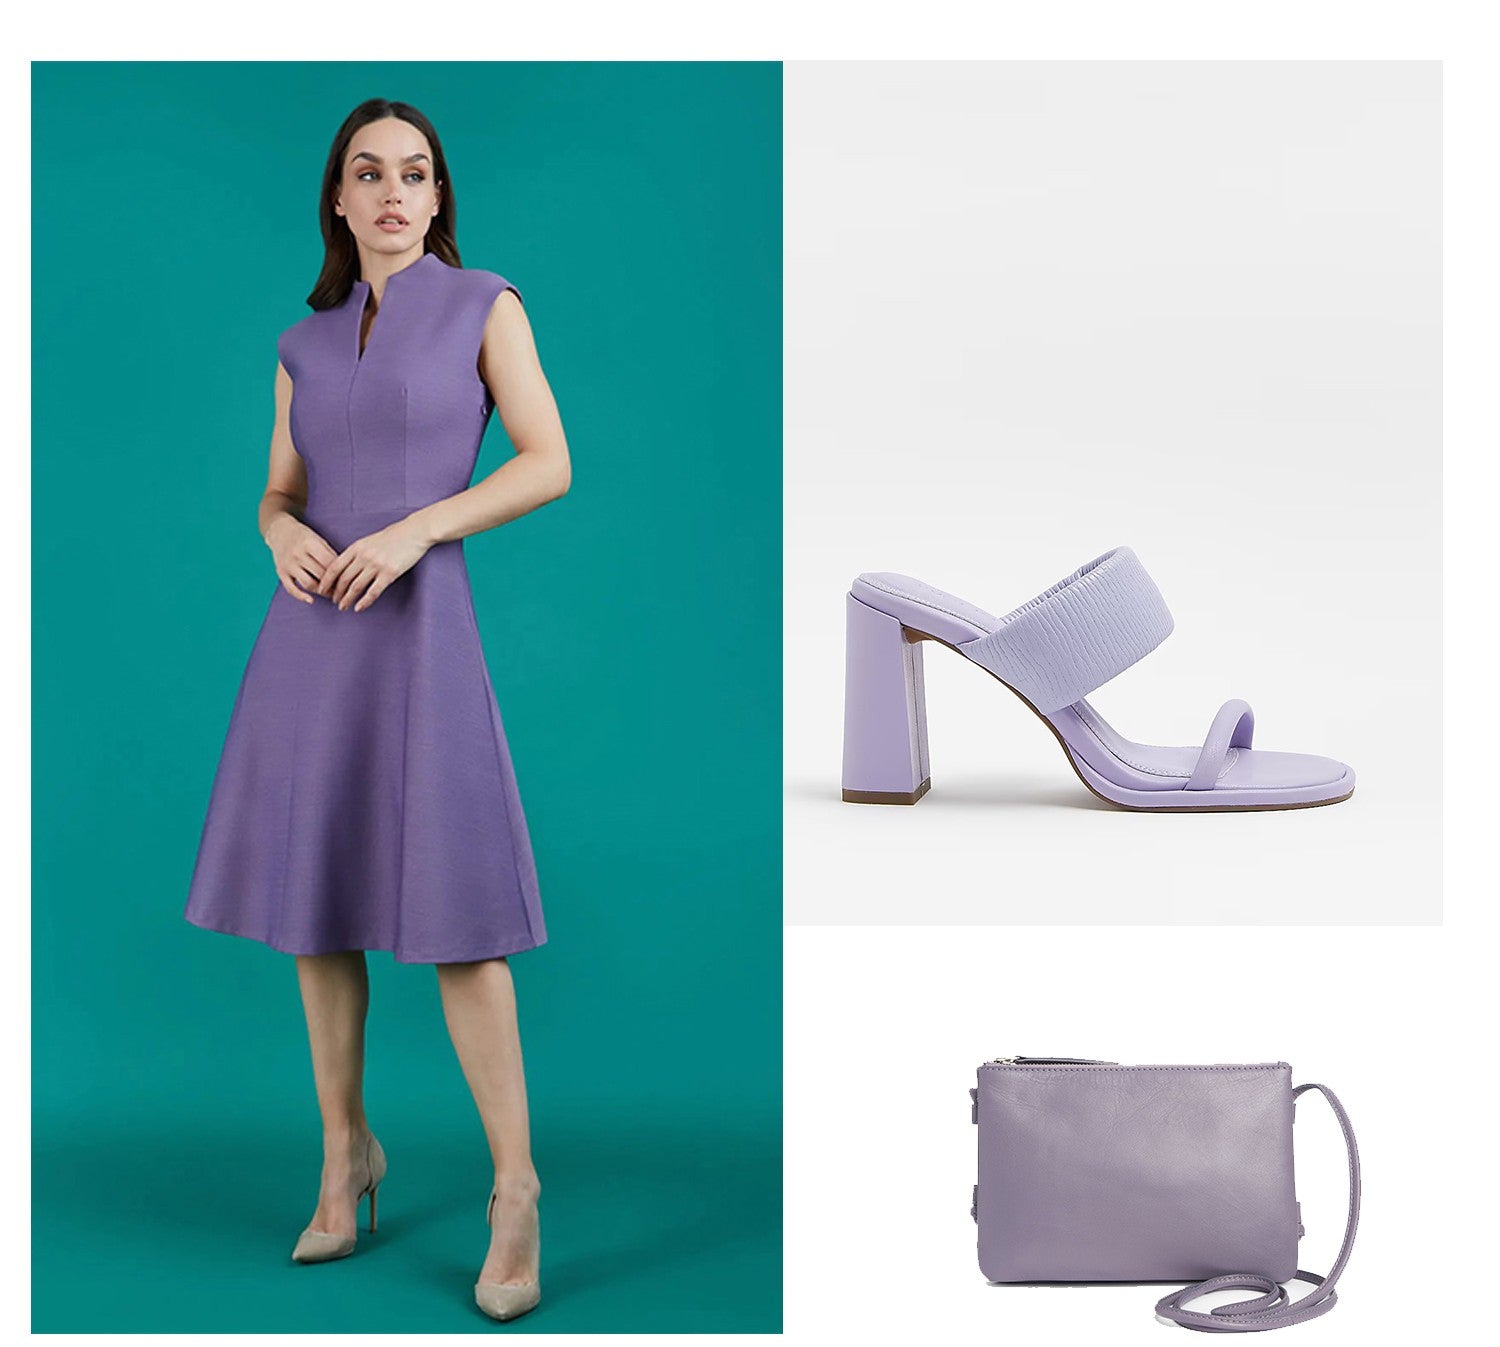  a series of images showcasing each in the chosen colour of dusky lilac. Links are below the image to direct to each product.